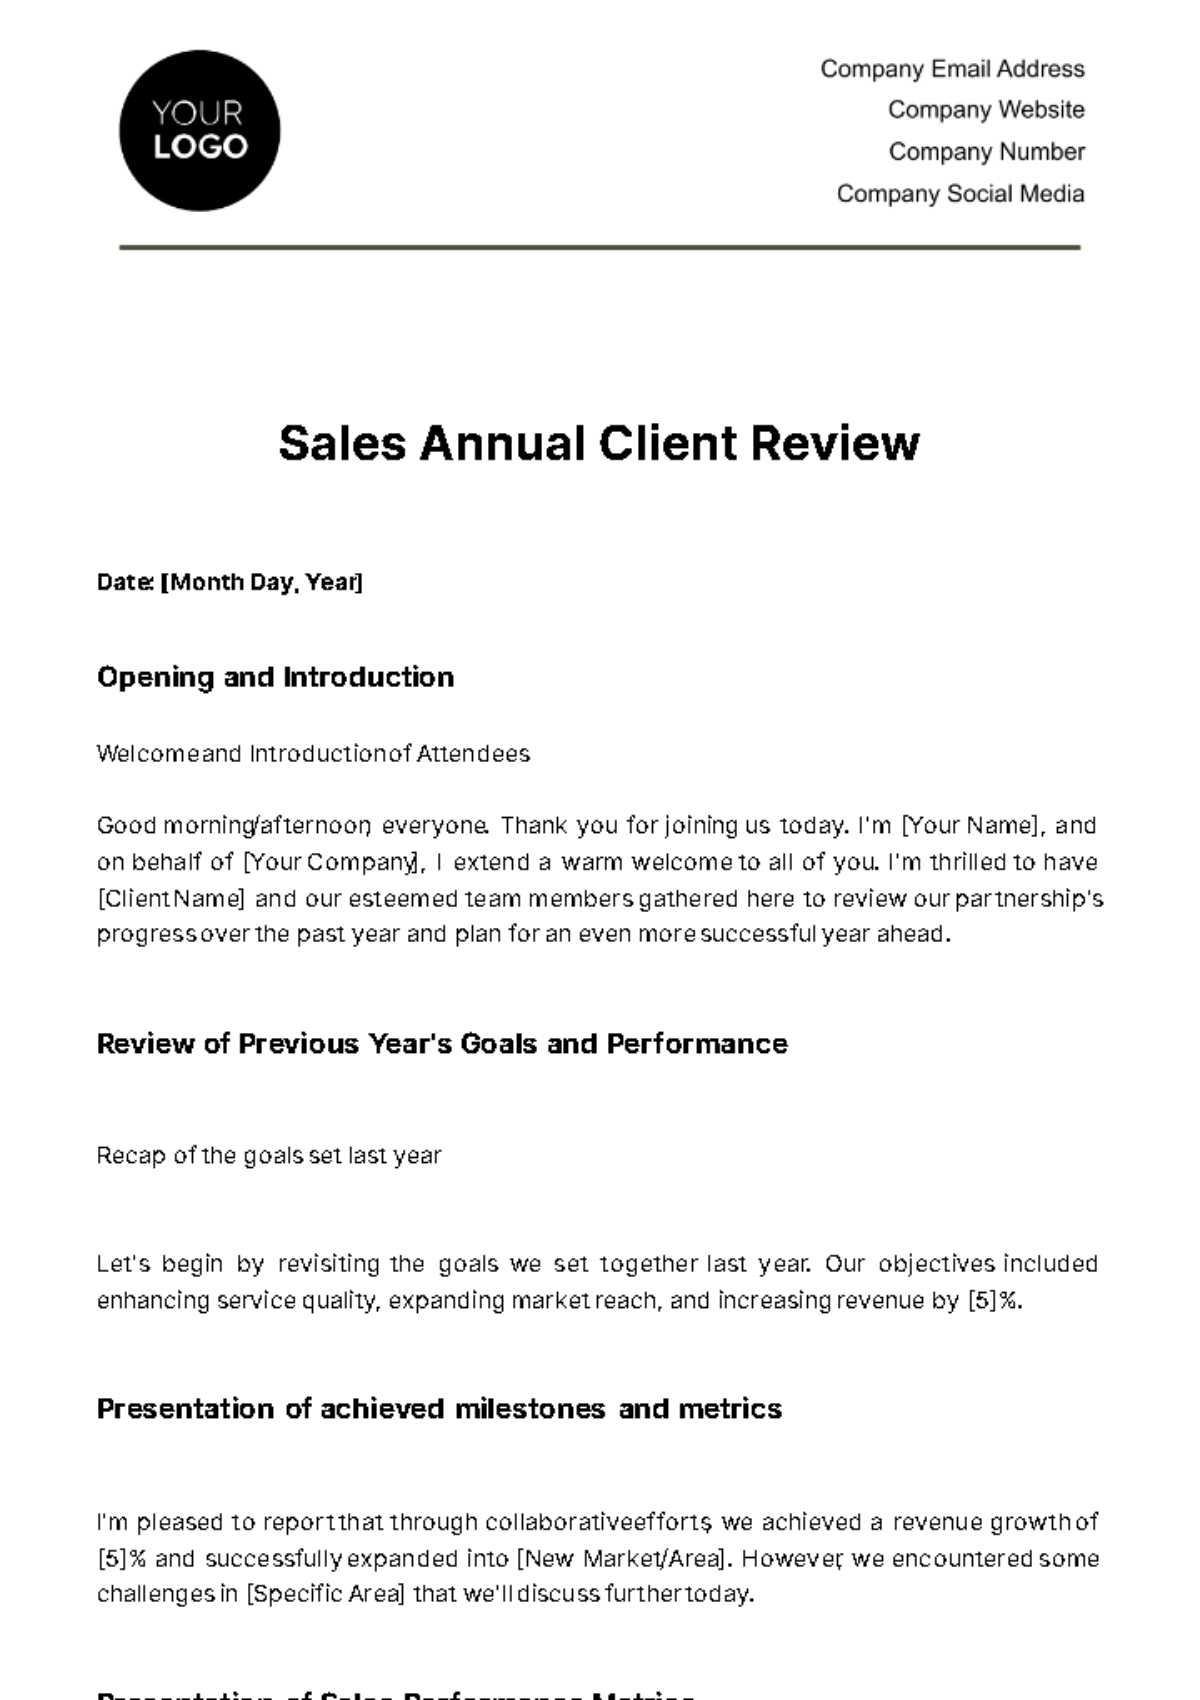 Free Sales Annual Client Review Template